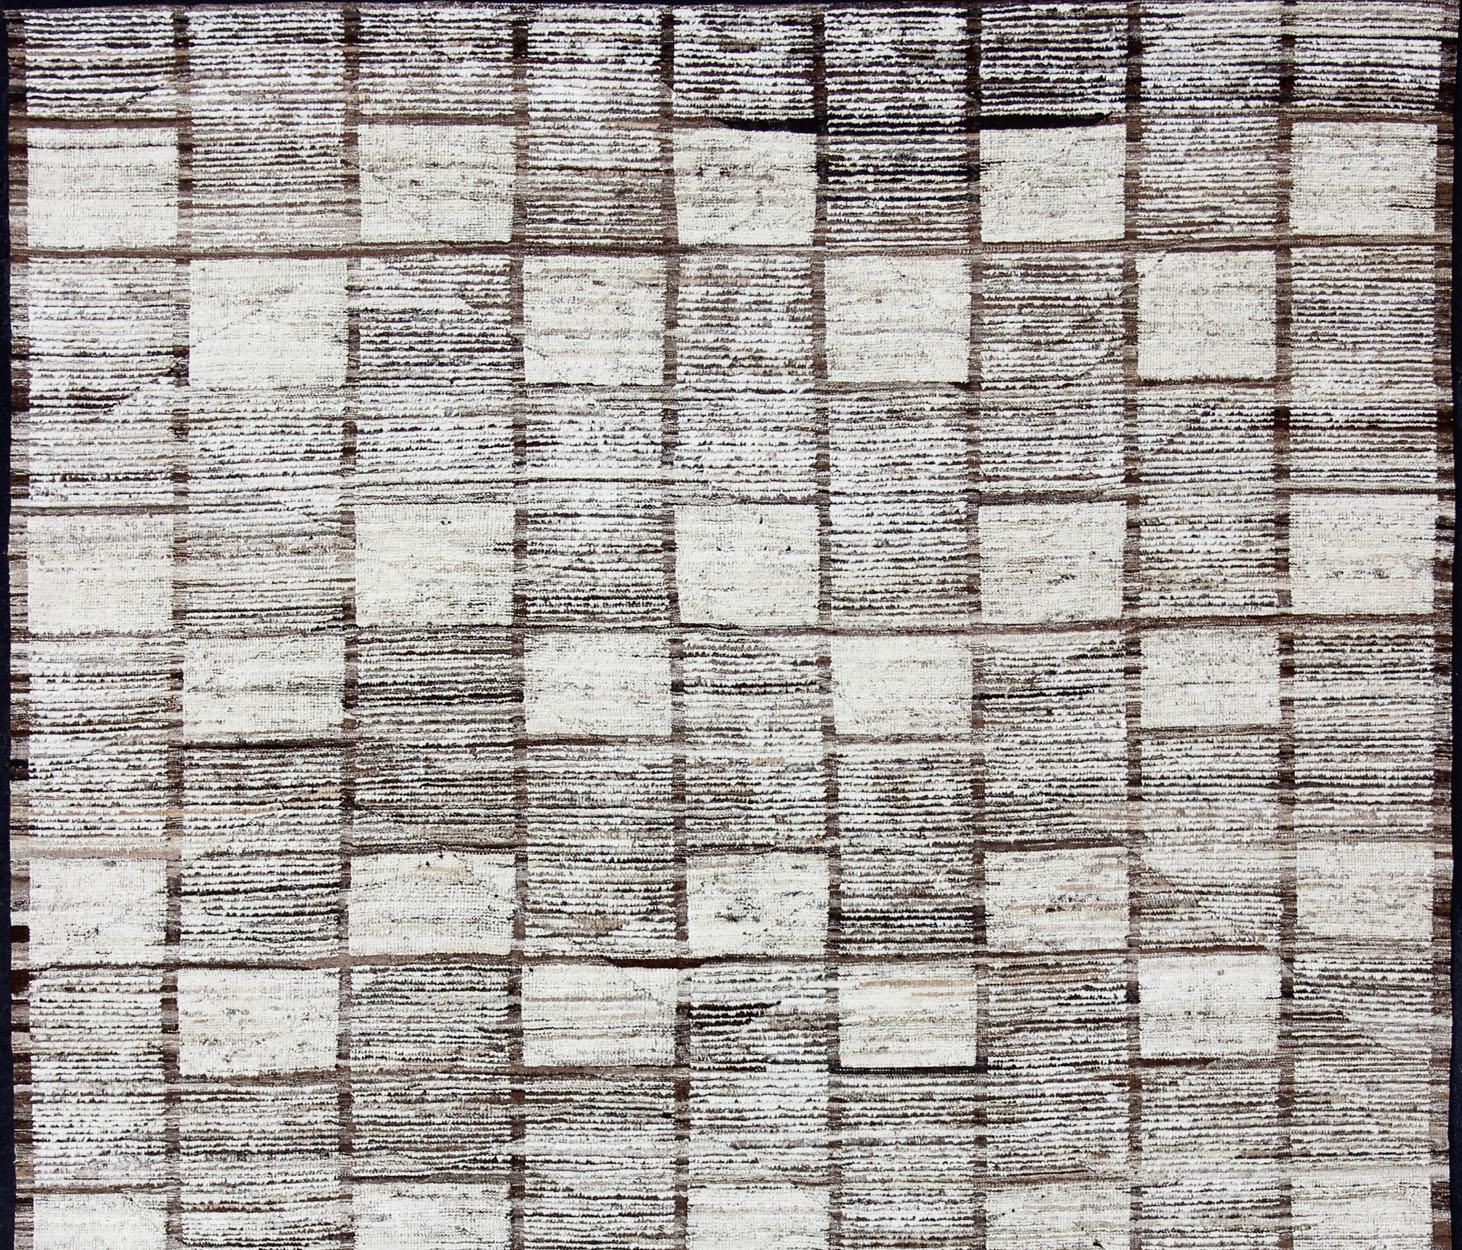 Keivan woven Arts-Modern piled rug with checkerboard design in natural wool tones, rug AFG-33324, country of origin / type: Afghanistan / Piled, condition: new

This new creation of modern distressed rug features checkerboard design and in cream,